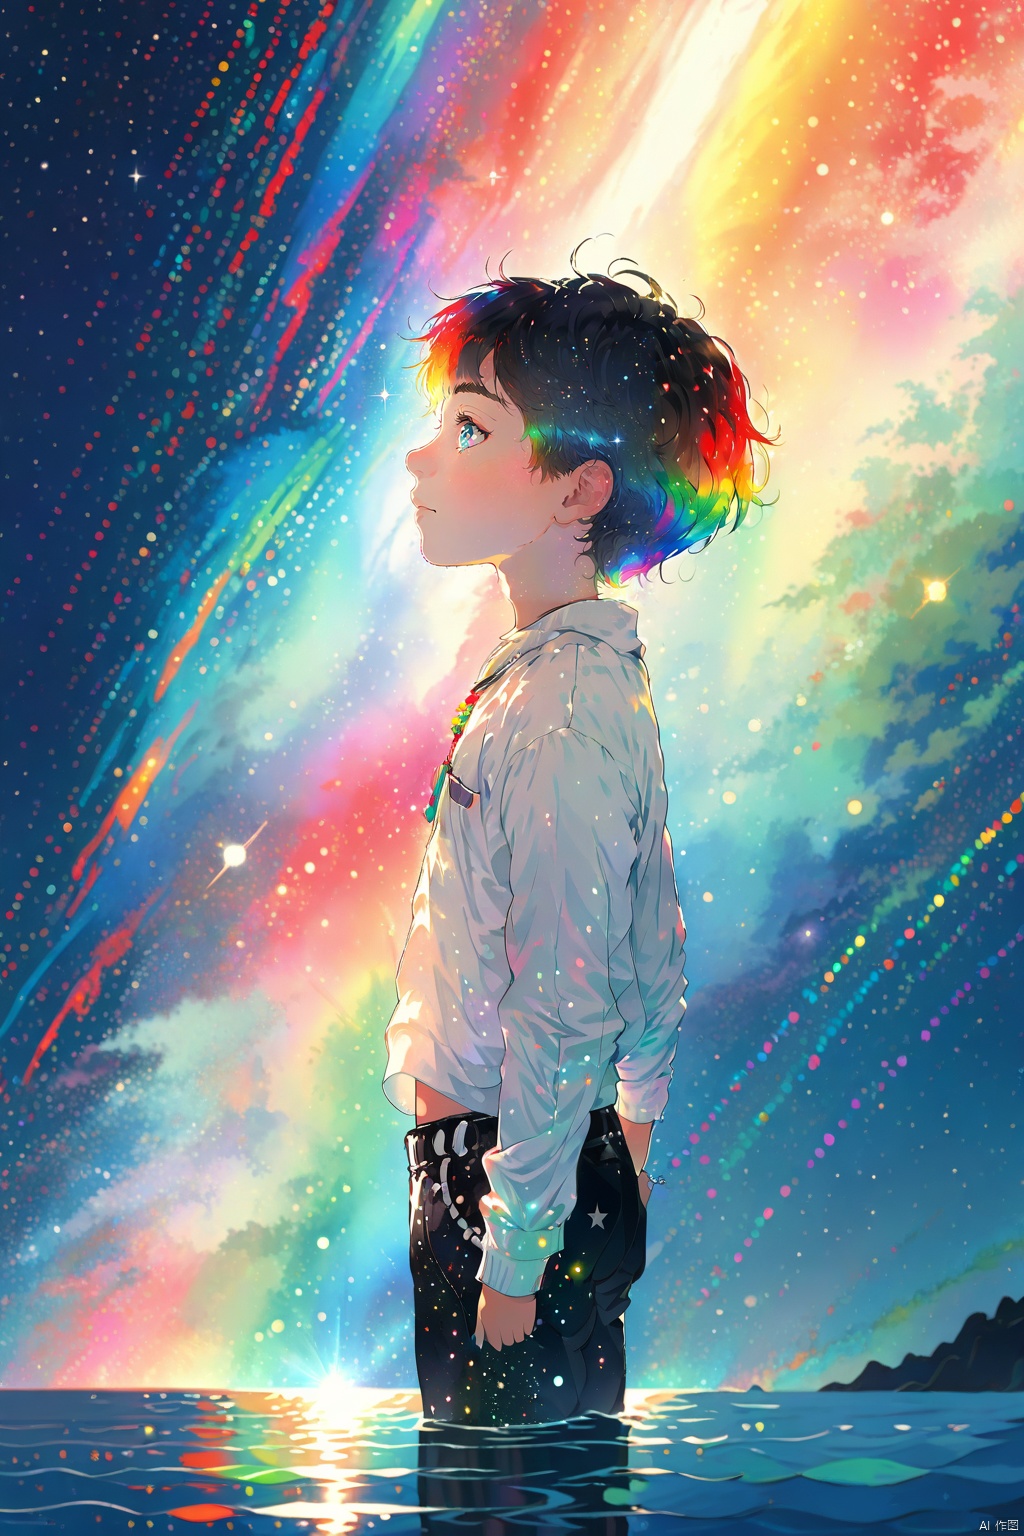  1 boy, closeup,cute, portrait, upper body, white clothes,black pants, face from side, on the sea, under the starry sky, the sea reflects the starry sky, rainbow color light reflected on the boy's face, sparkling lights, magical atmosphere, pointillism, Silhouette view, Cosmic wonders, Mysterious and colorful, nebula light, cosmic light, galactic light, Astronomical view, Macroscopic perspective, perspective view, masterpiece,